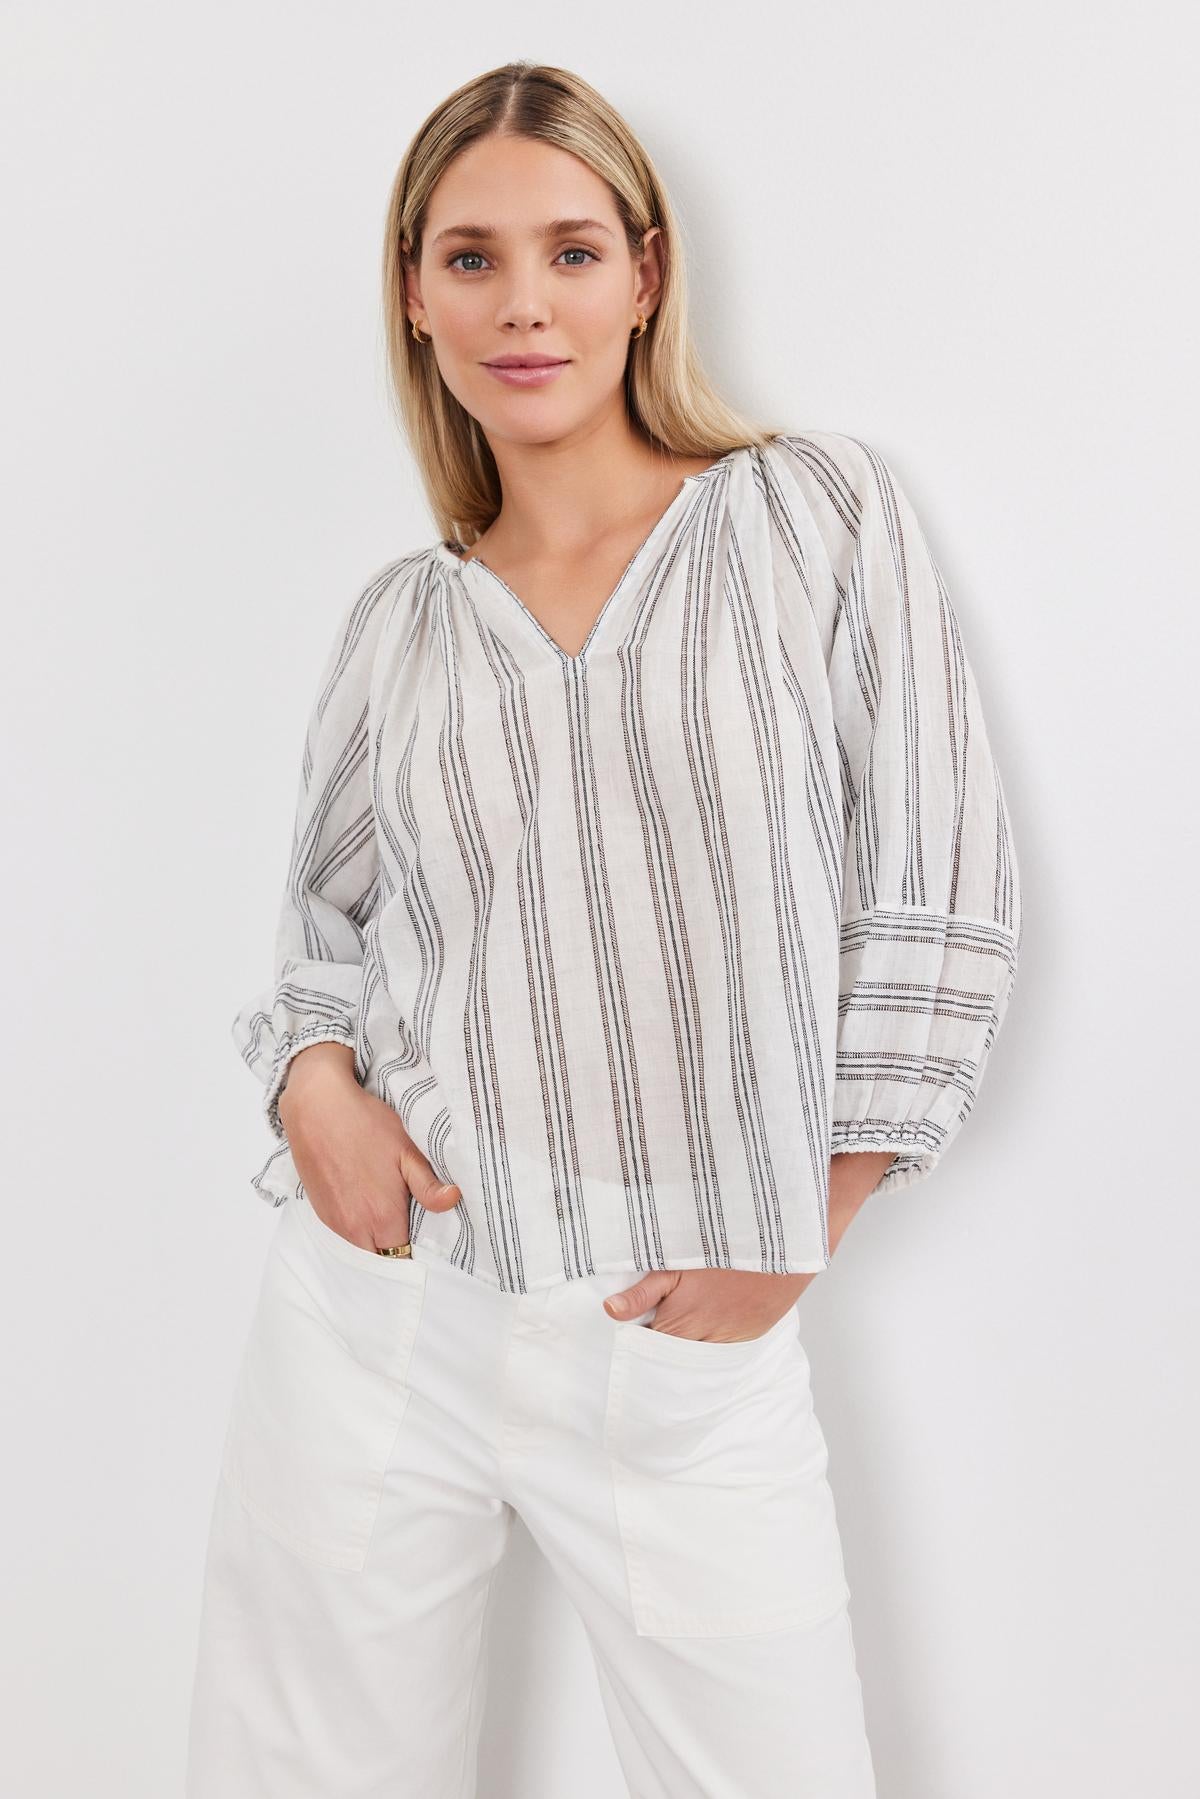 A woman stands confidently, wearing the Gianna top by Velvet by Graham & Spencer with vertical stripes and white pants, with her hand in her pocket.-36910246035649